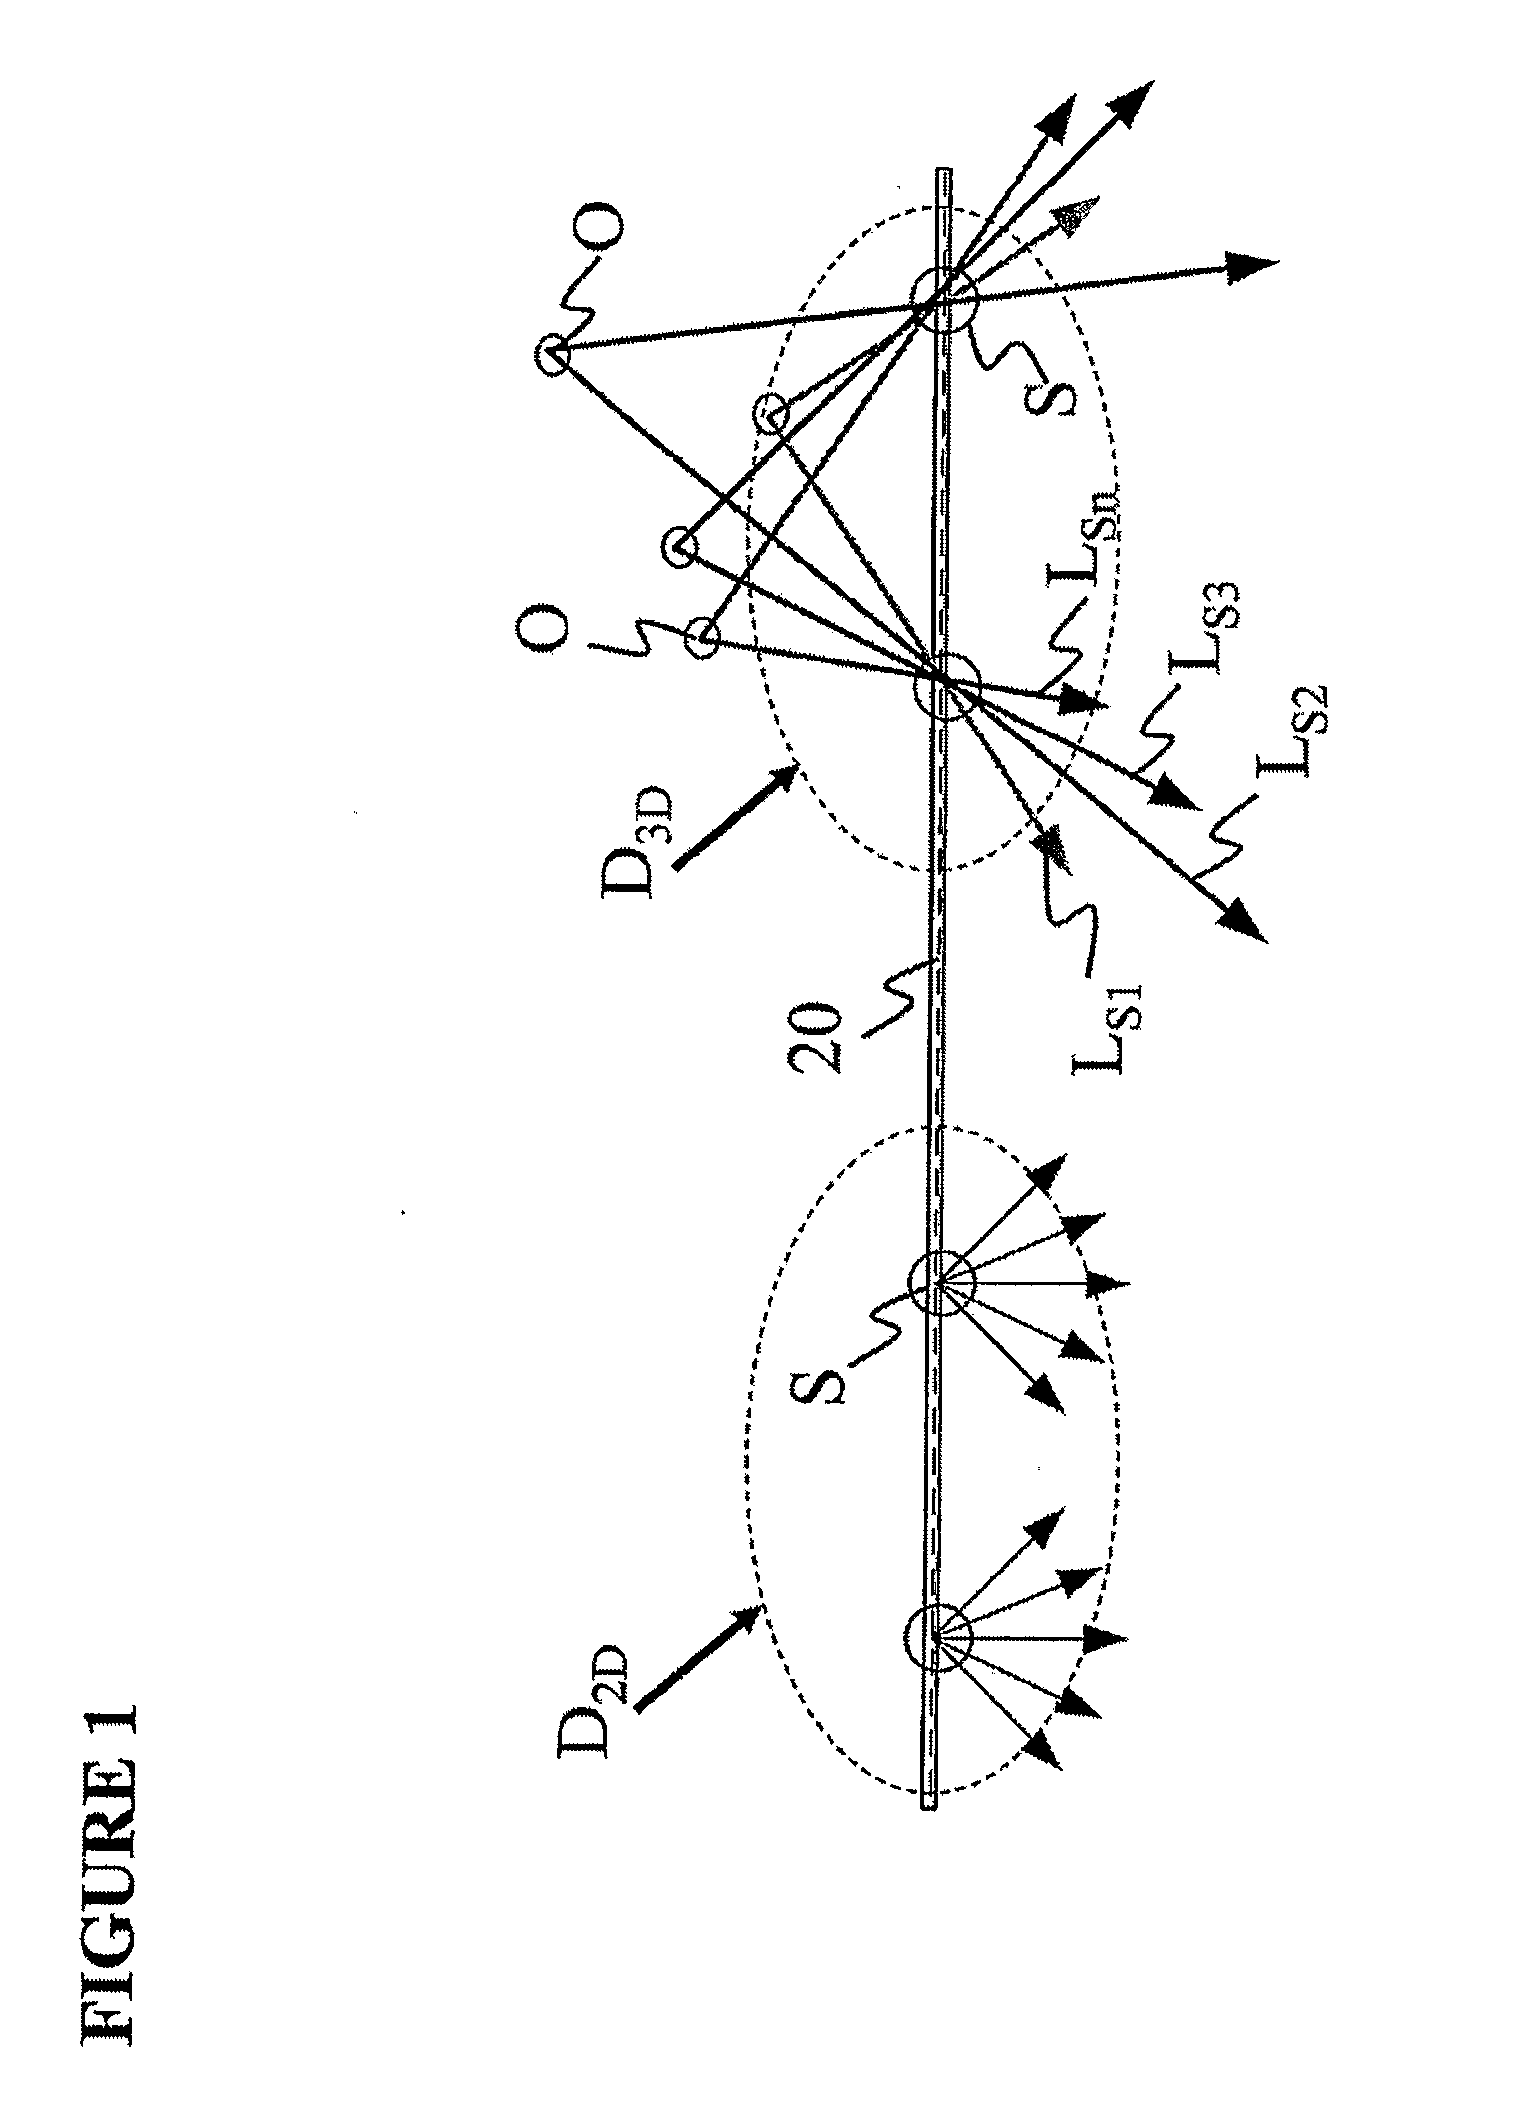 Apparatus for Displaying 3D Images